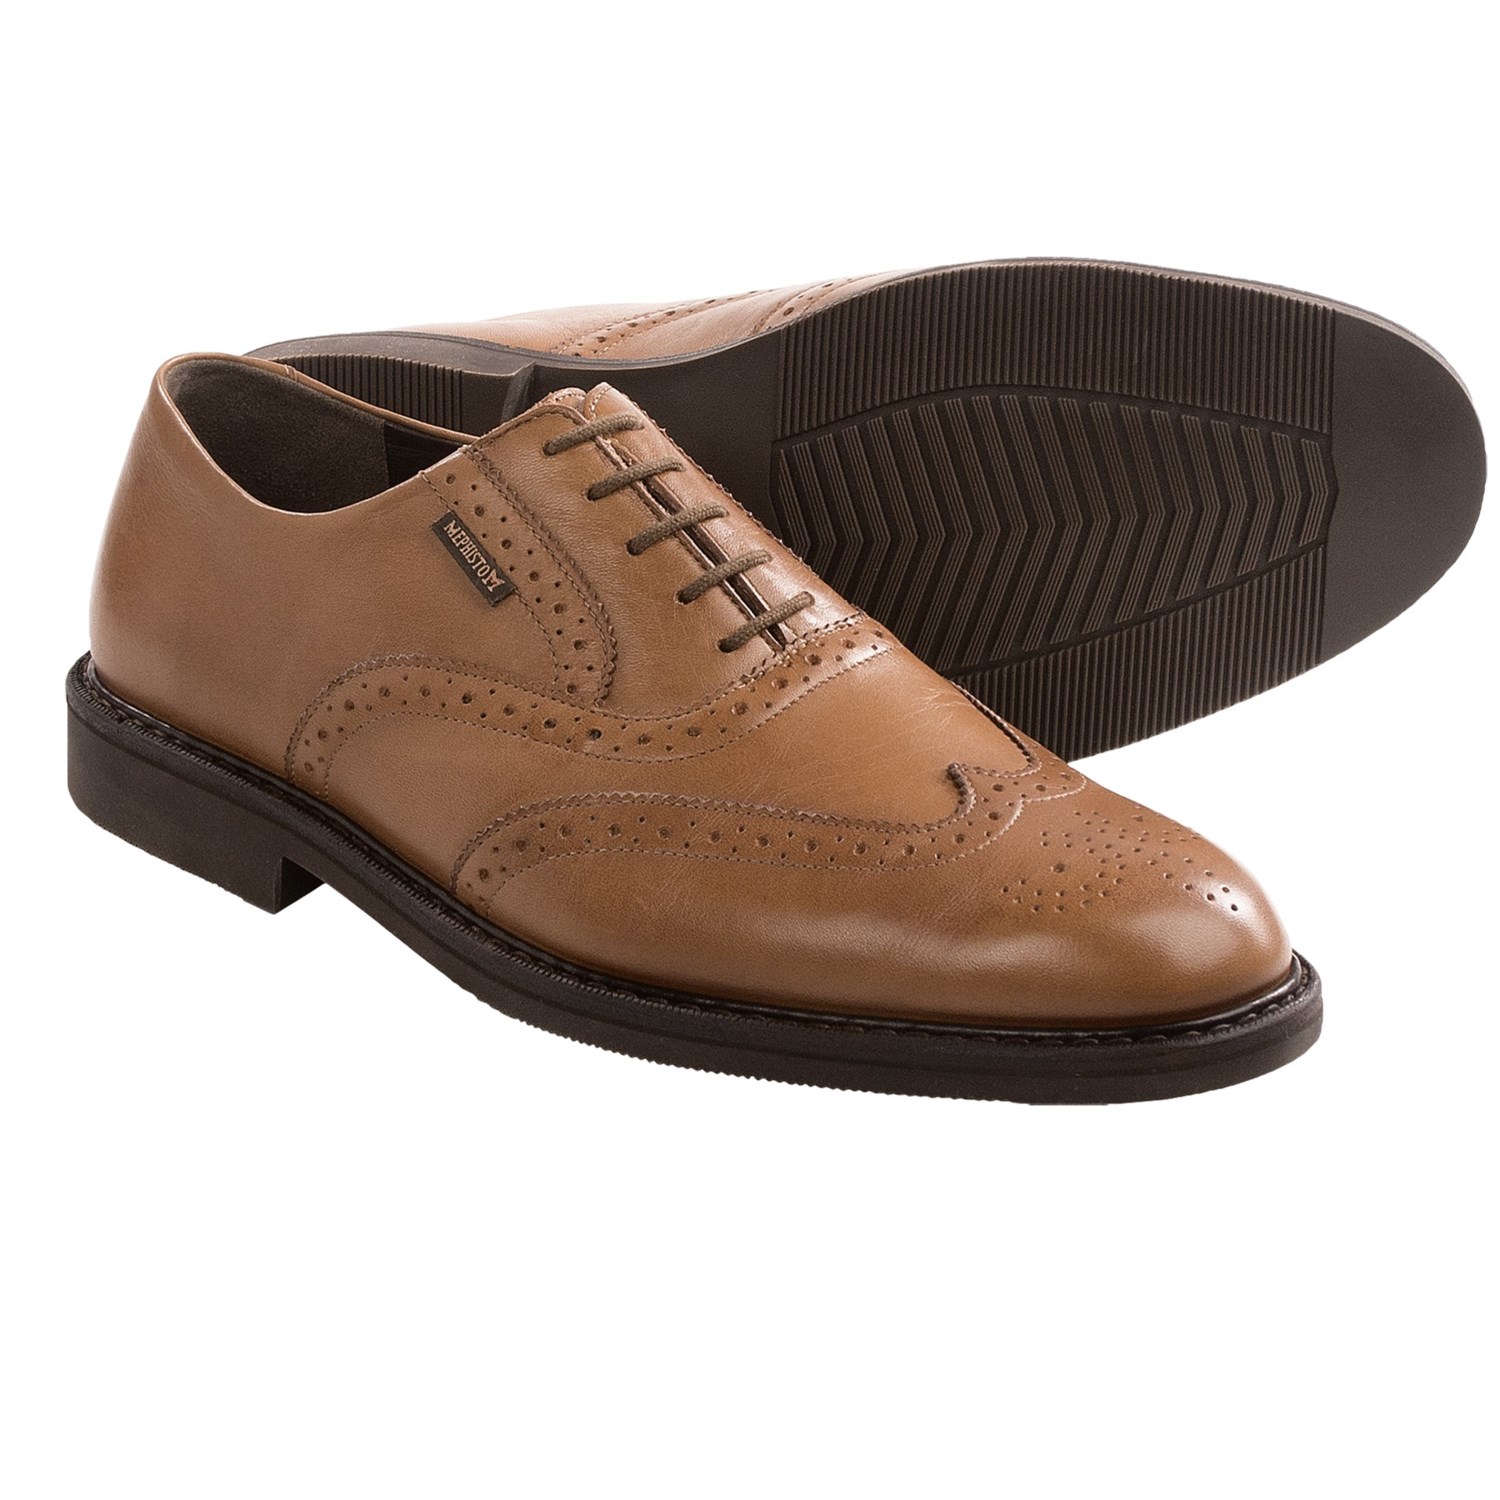 Mephisto Martial Oxford Shoes (For Men) 7696G - Save 30%